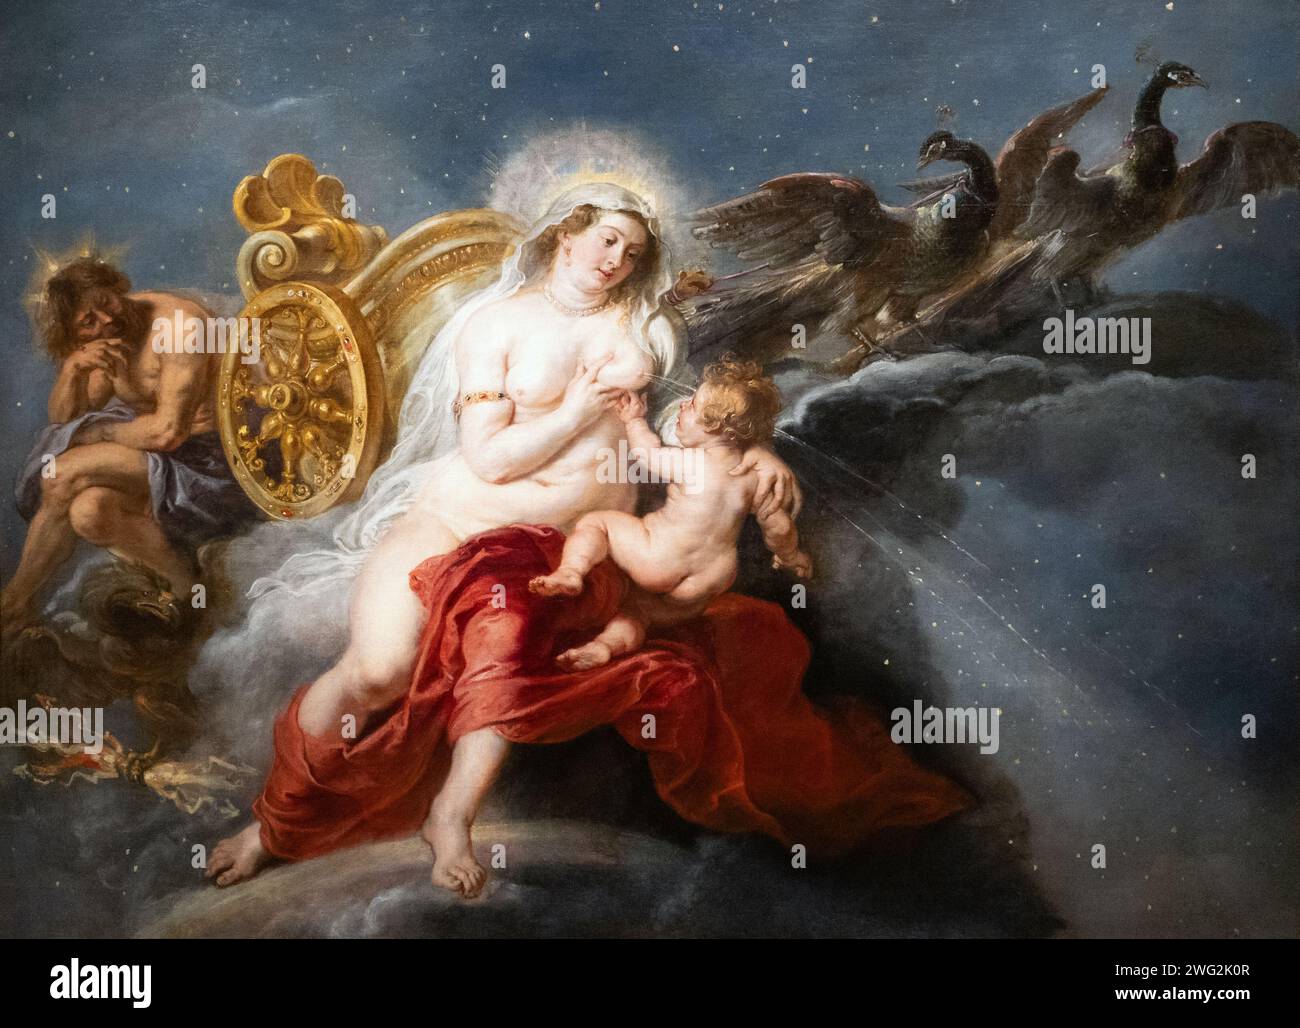 Rubens painting; 'The Birth of the Milky Way', 1636-8, Oil on Canvas. Jupiter God, Juno goddess and the baby Hercules. 1600's mythological paintings. Stock Photo